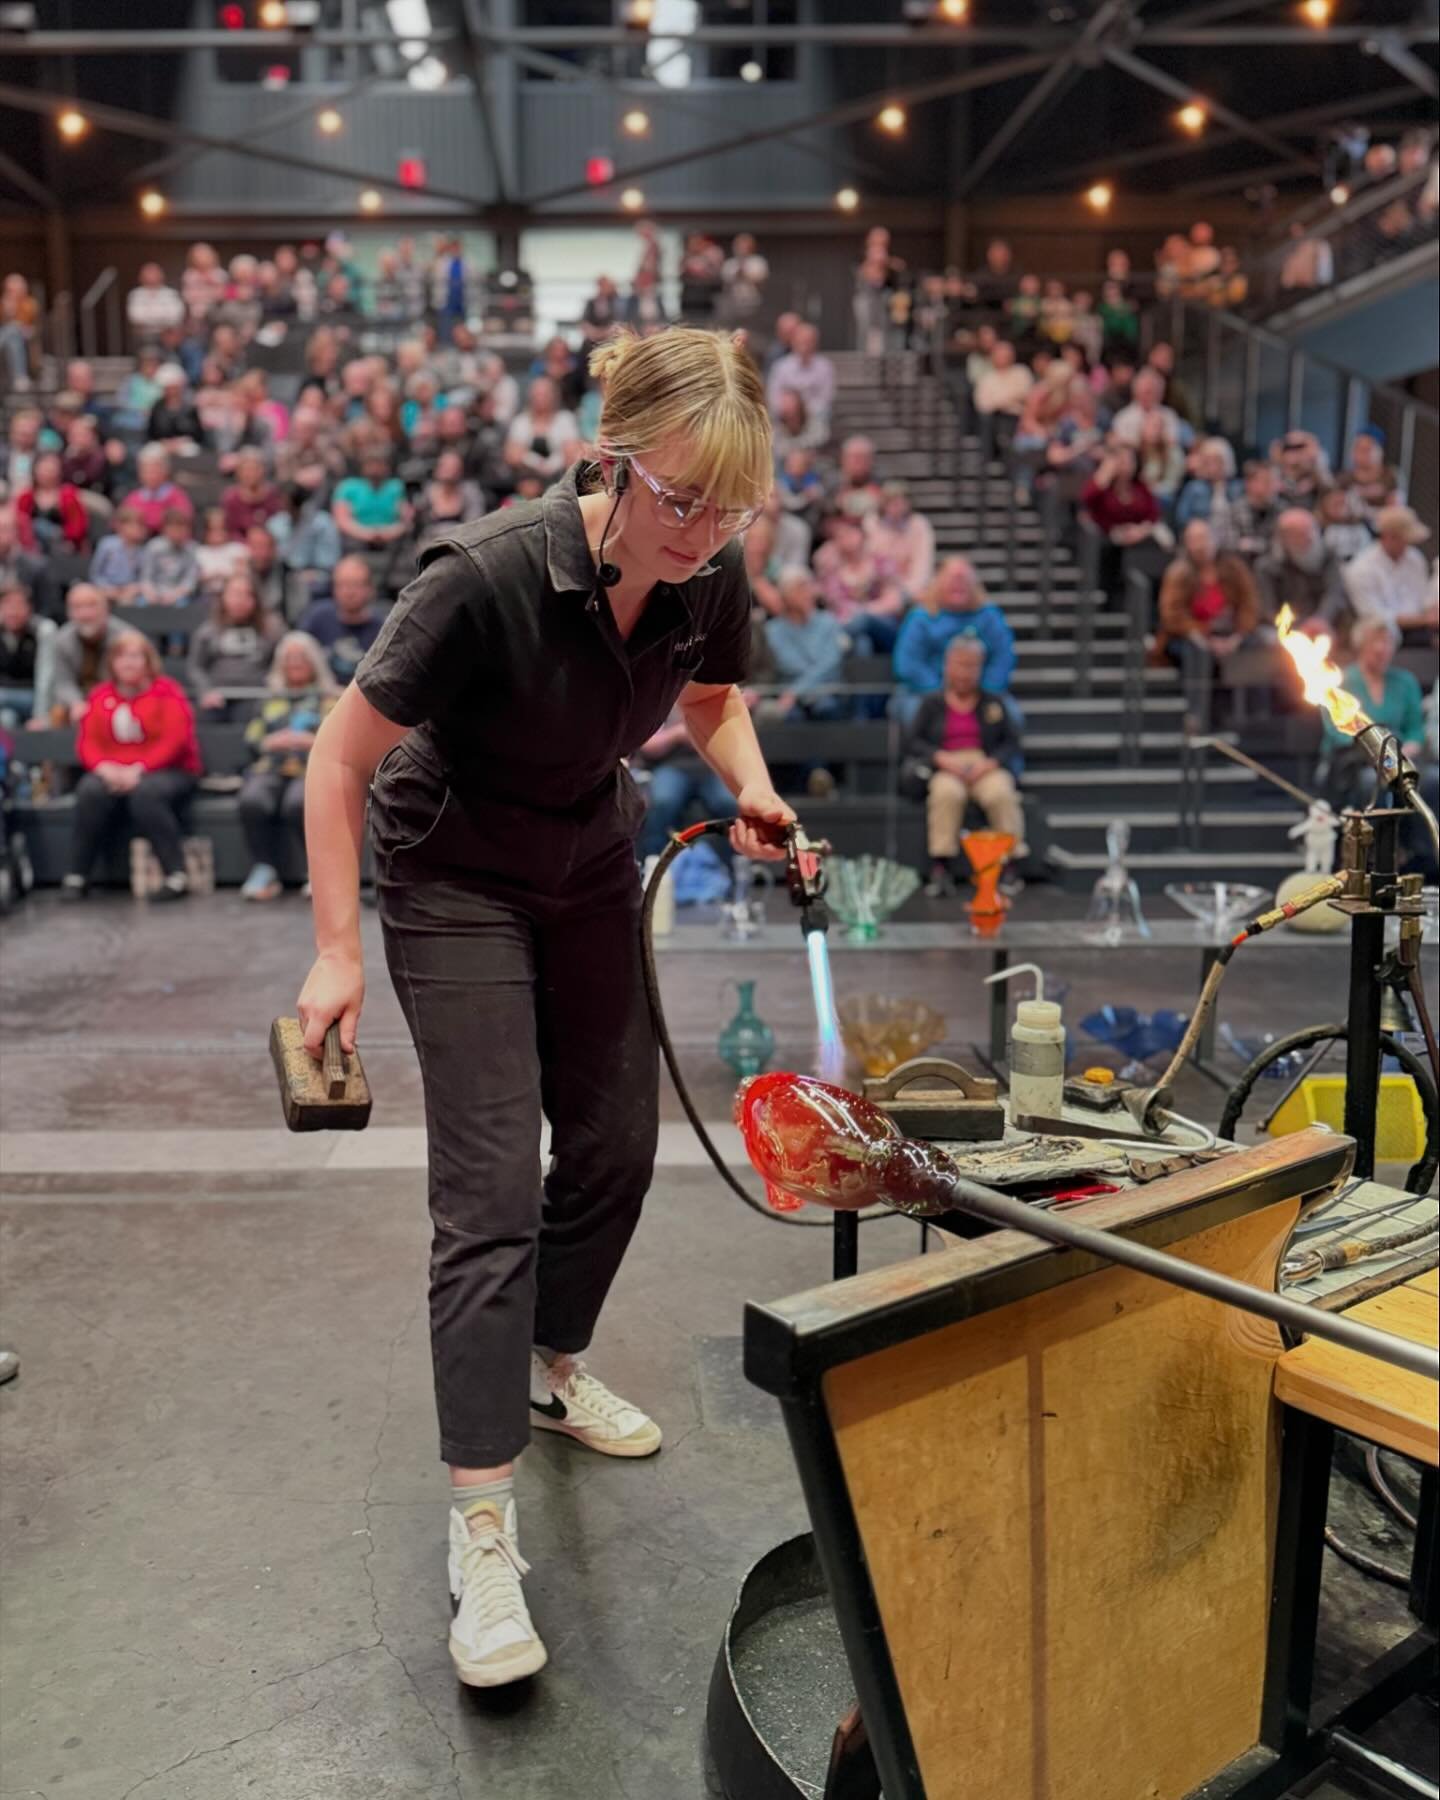 Reminiscing on a couple of awesome days last week spent at @corningmuseum- I have spent many many hours on their YouTube channel watching some of my favorite artists&rsquo; demonstrations in the amphitheater hot shop, and I got to fulfill my dream of